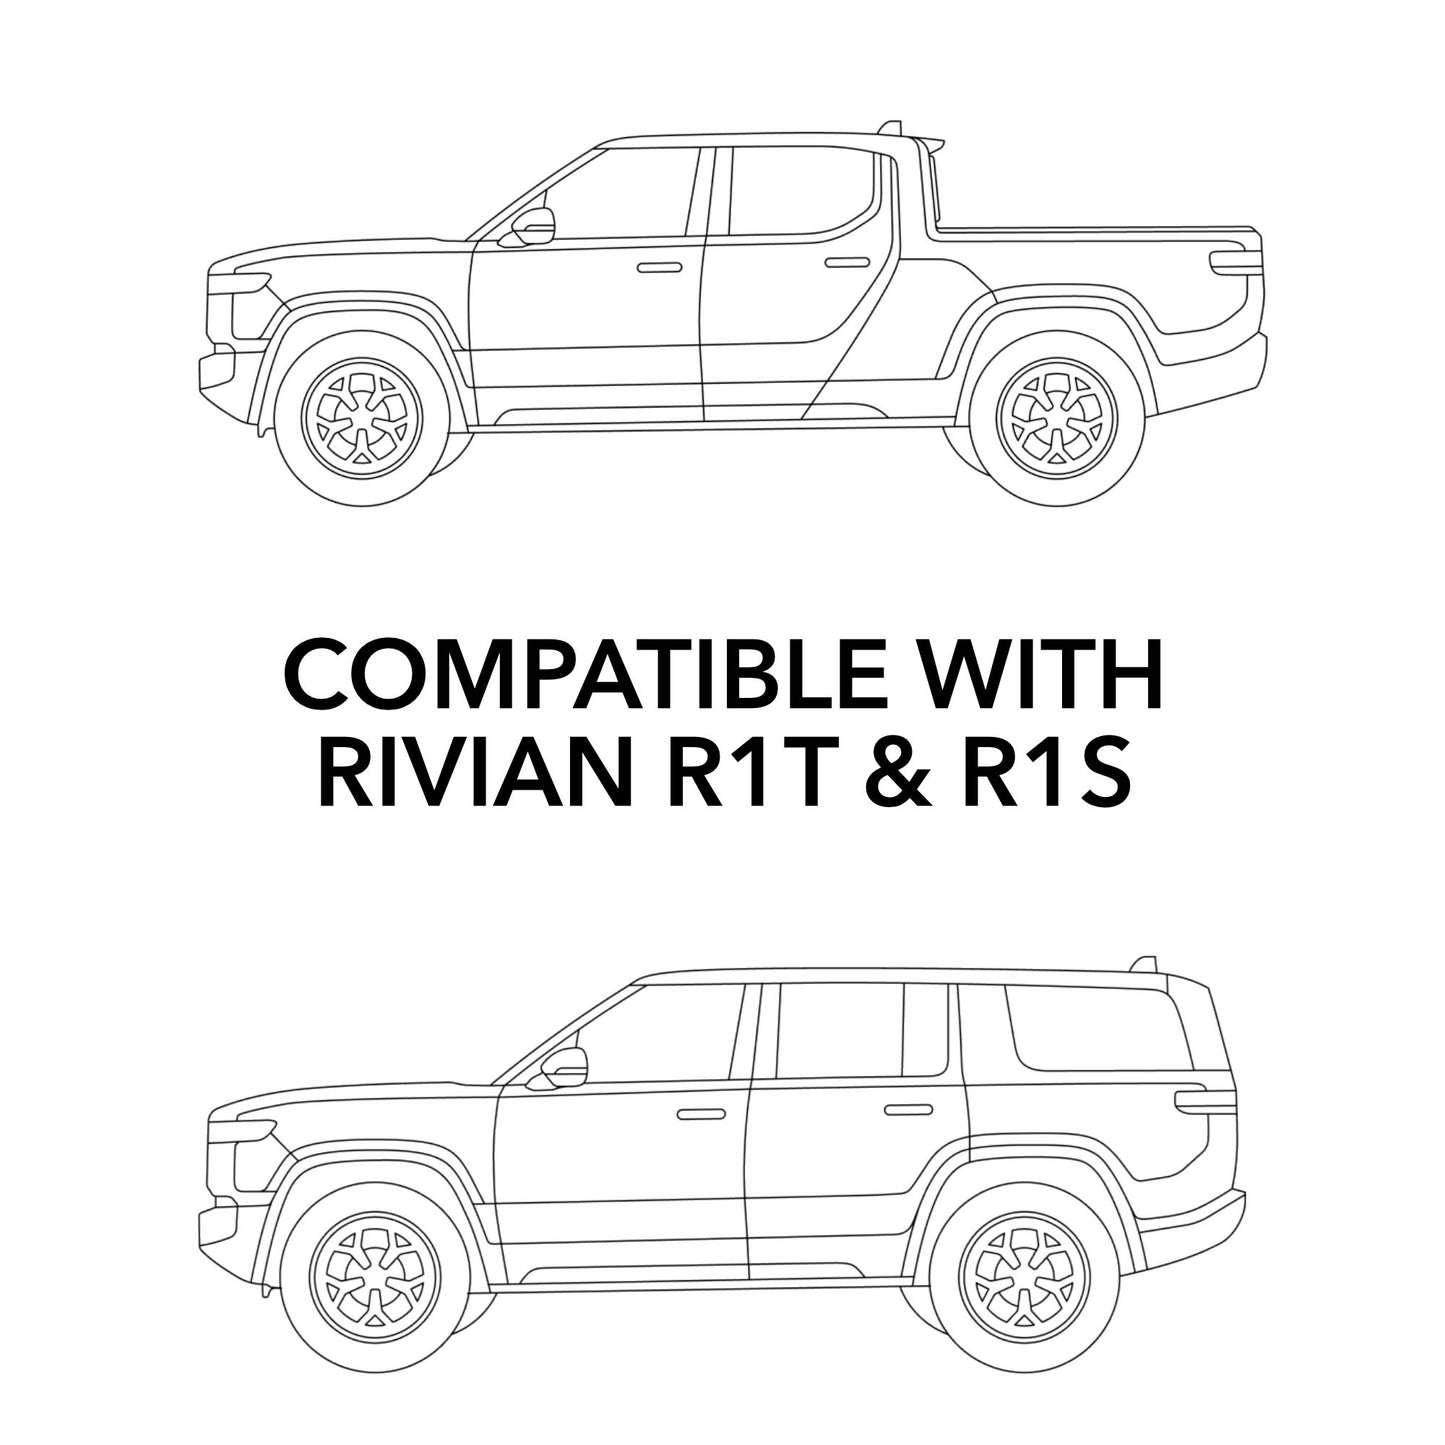 Hood Clear Protection Film (PPF) for Rivian R1T/R1S